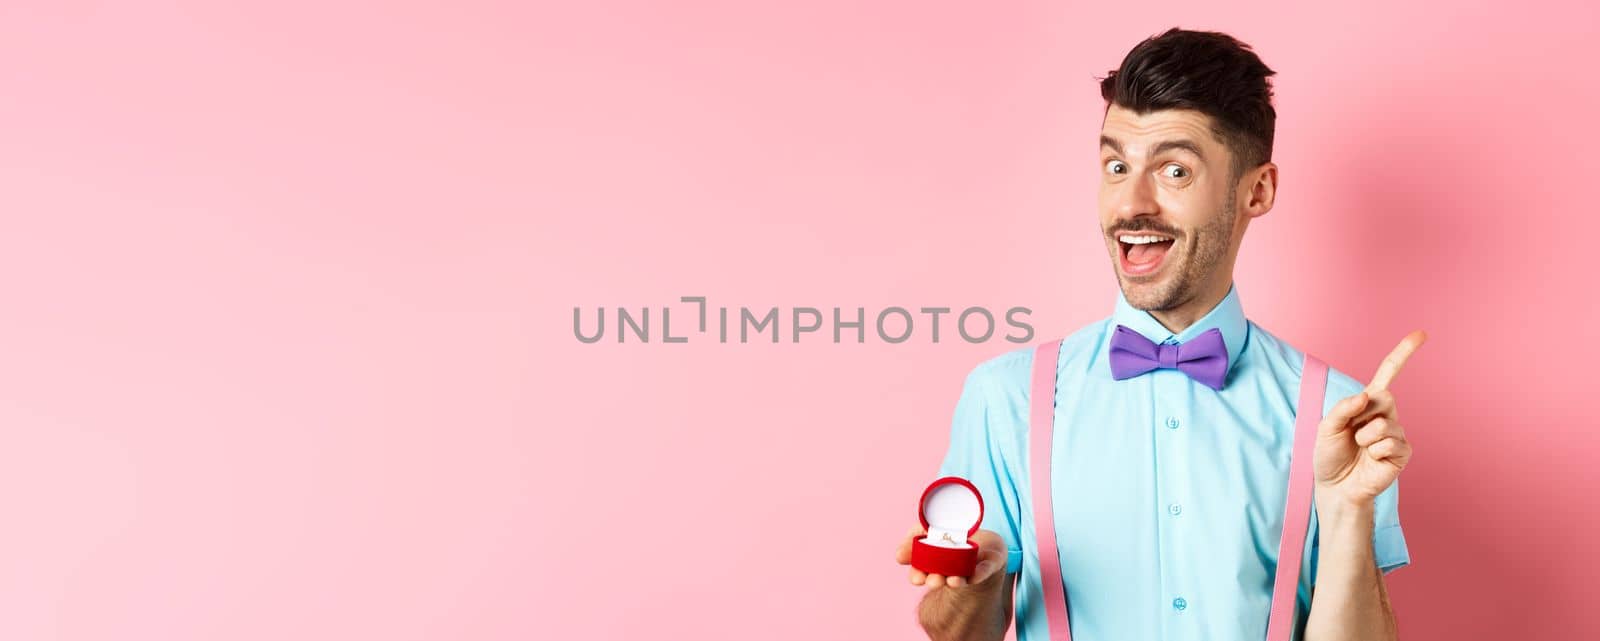 Valentines day. Funny guy with moustache and bow-tie, showing engagement ring and pointing finger at upper right corner, standing on pink background.